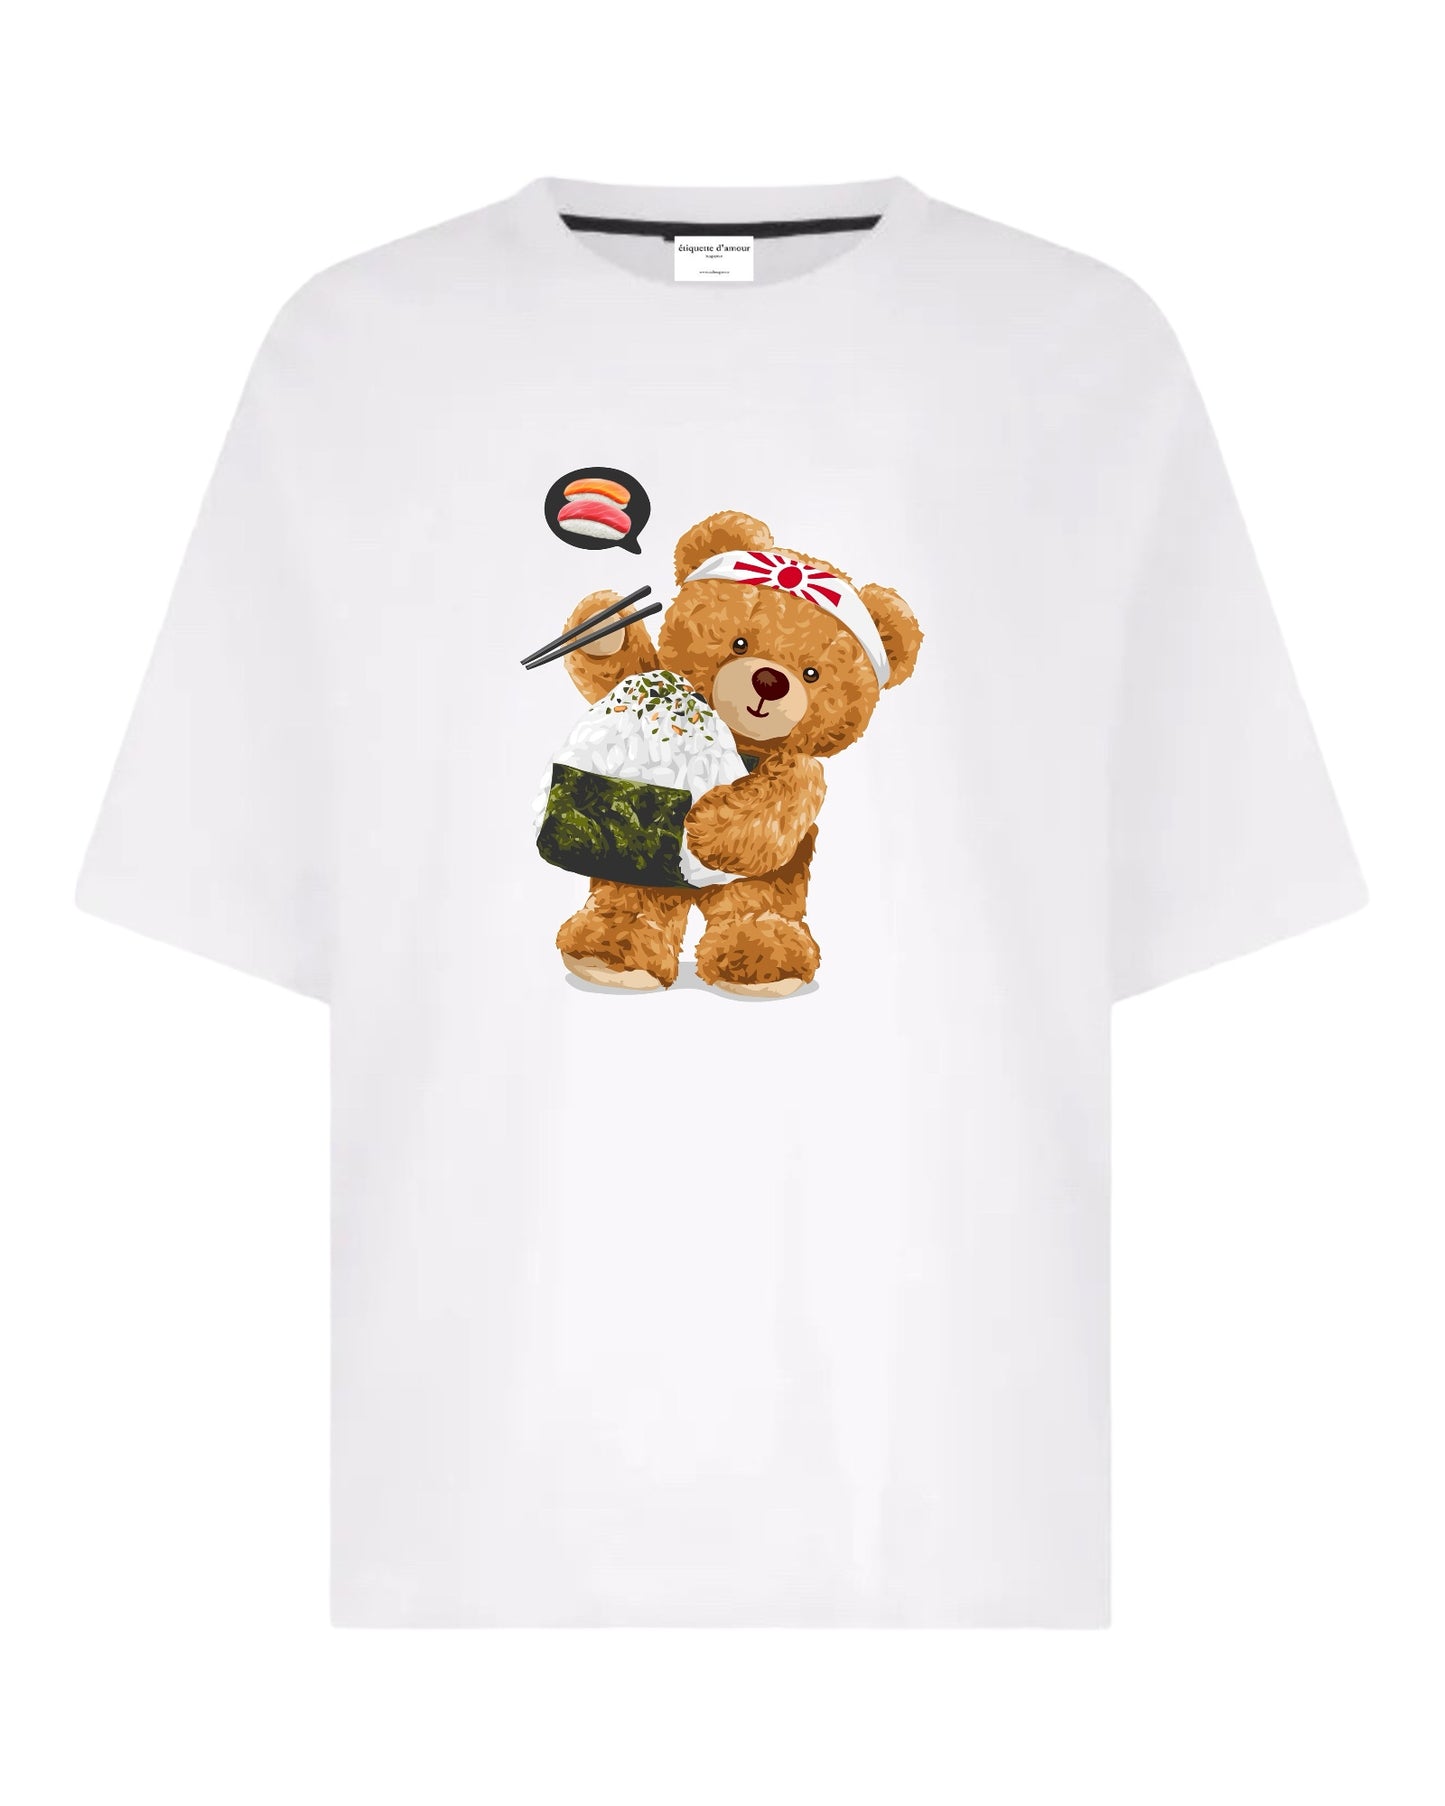 "Rice Roll Relish with Teddy" Unisex Oversized T-Shirt